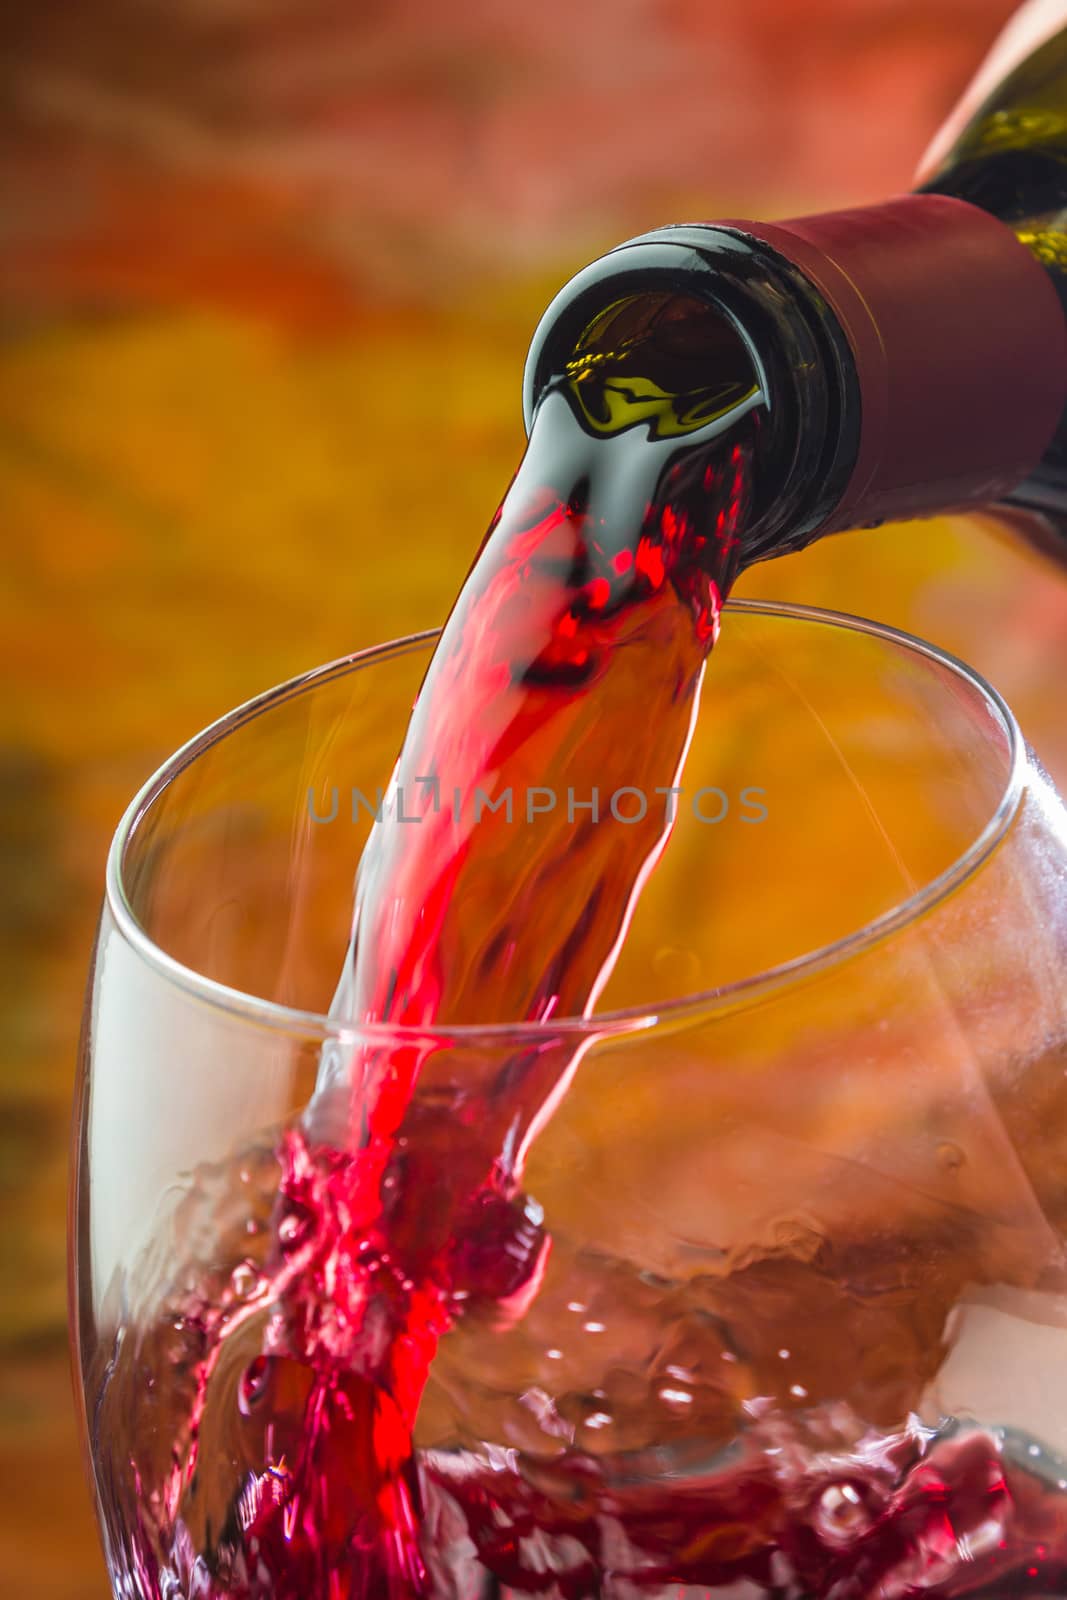 Wine pours into the glass of the bottle by oleg_zhukov